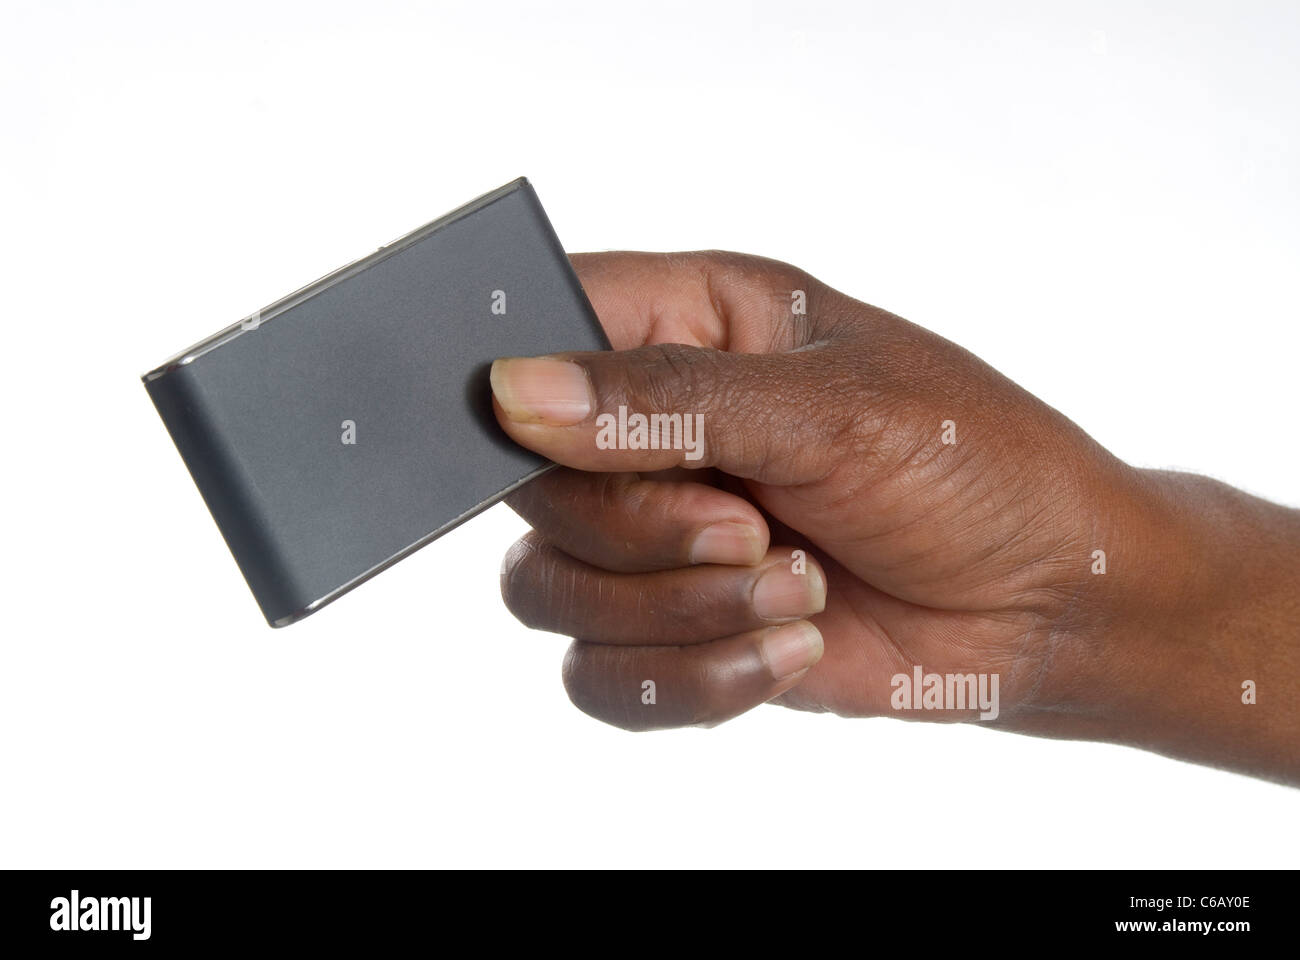 African's hand holding a blank bank card which could be used in advertising Stock Photo